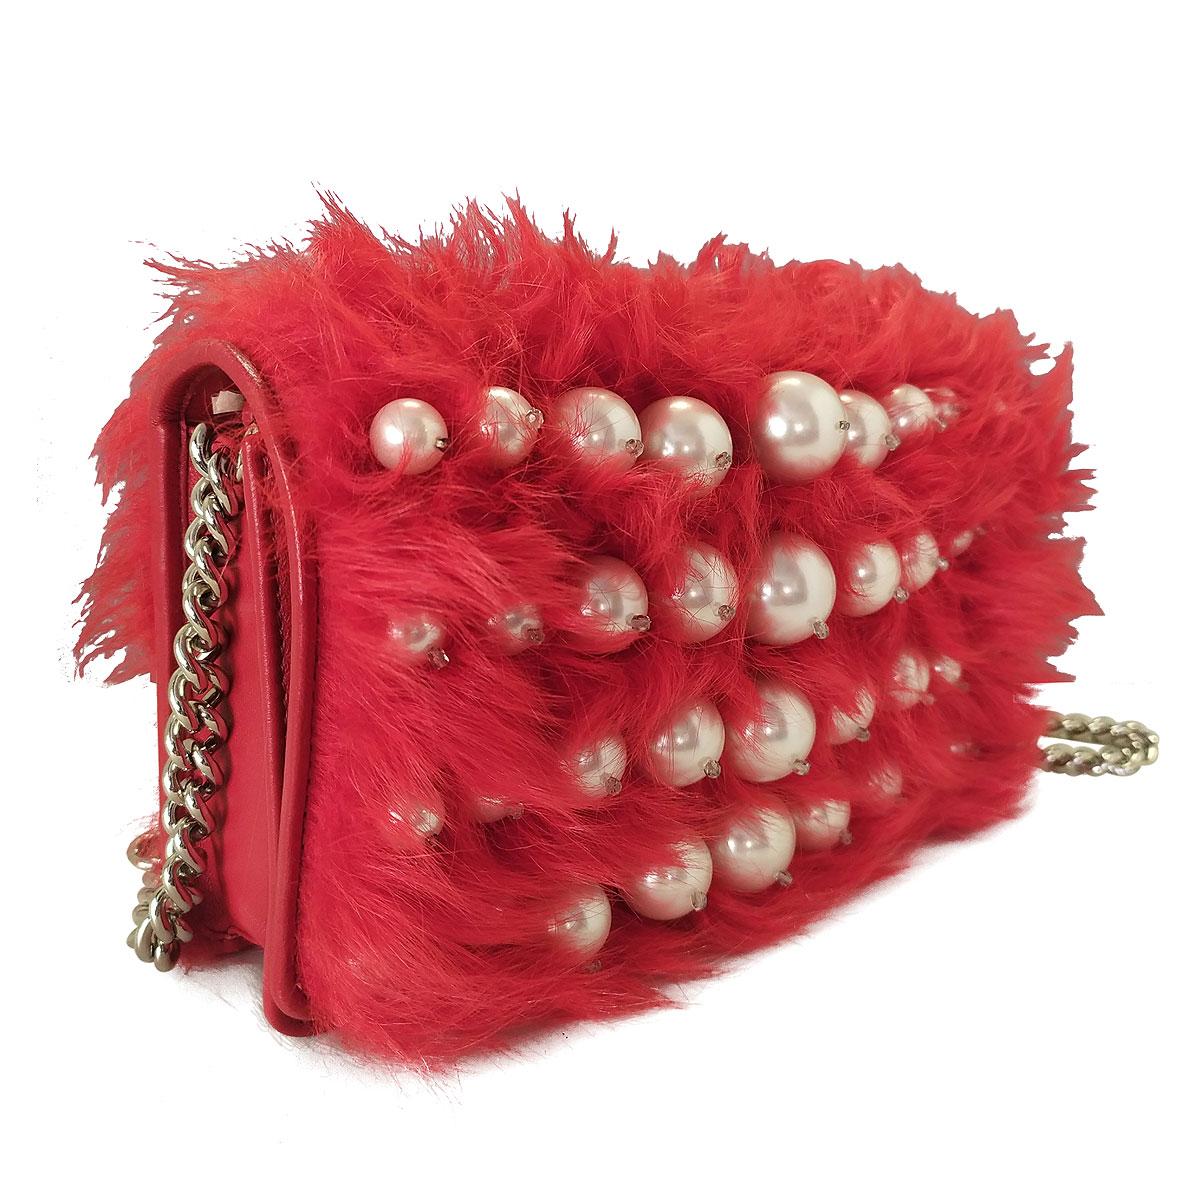 Funny and rare Miu Miu pochette
Mutton leather an fur
Red color
Detachable chain shoulder strap
Pearls decoration
Magnetic closure with automatic buttons
Different side spaces for cards
Removable metal mirror
Certificate of authenticity and